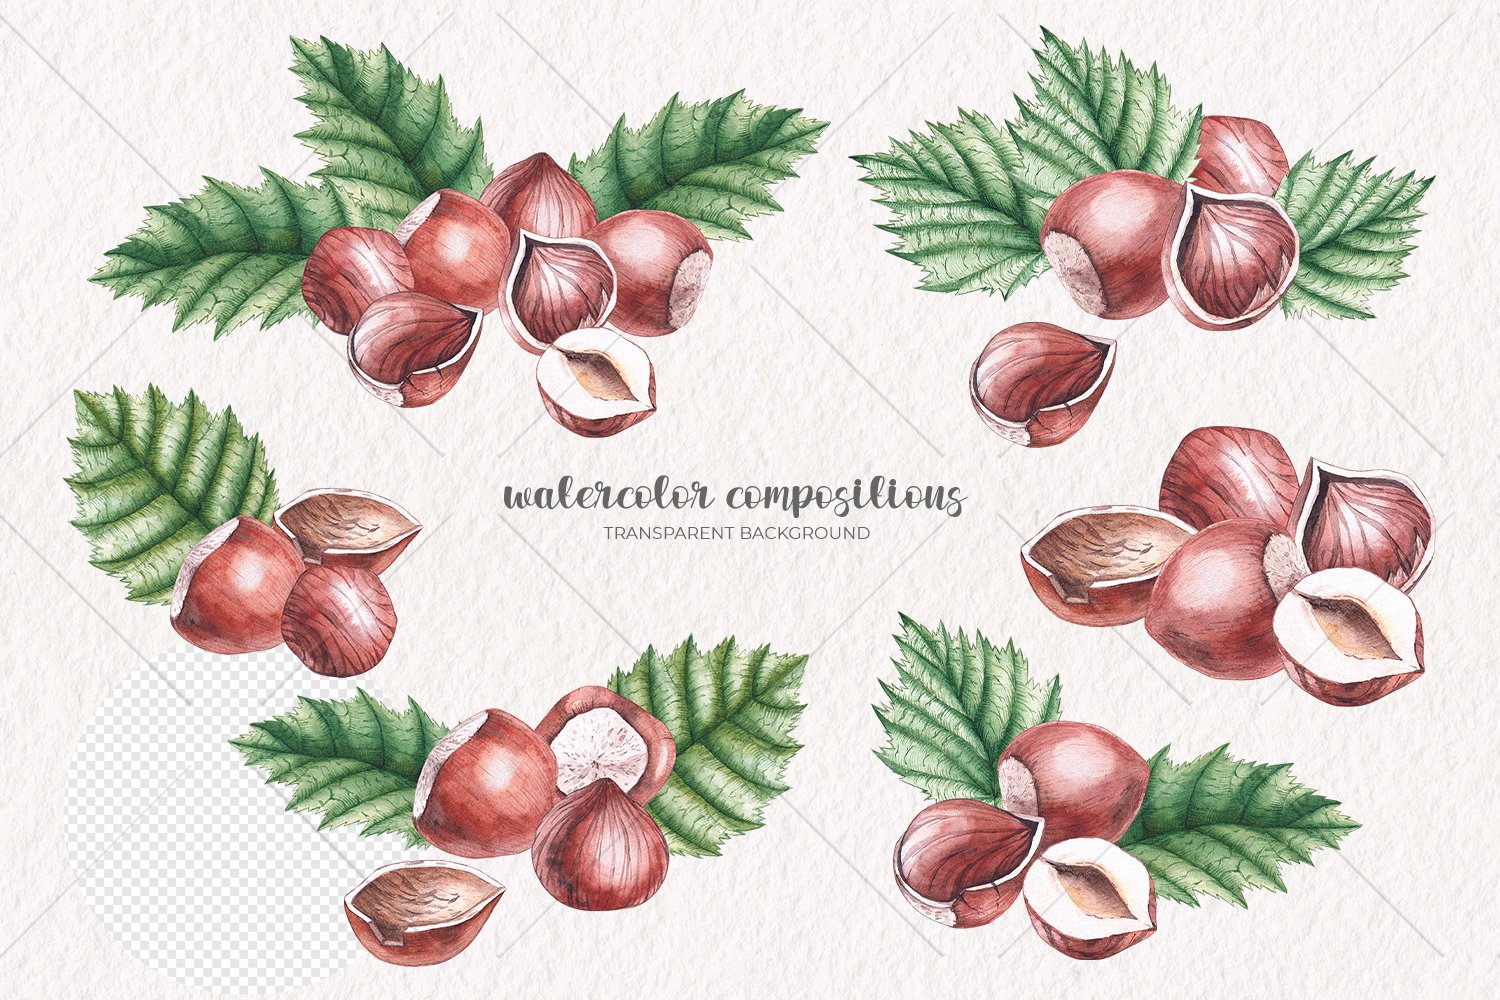 Lettering "Watercolor Compositions" and a set of different hazelnuts with leaves on a gray background.